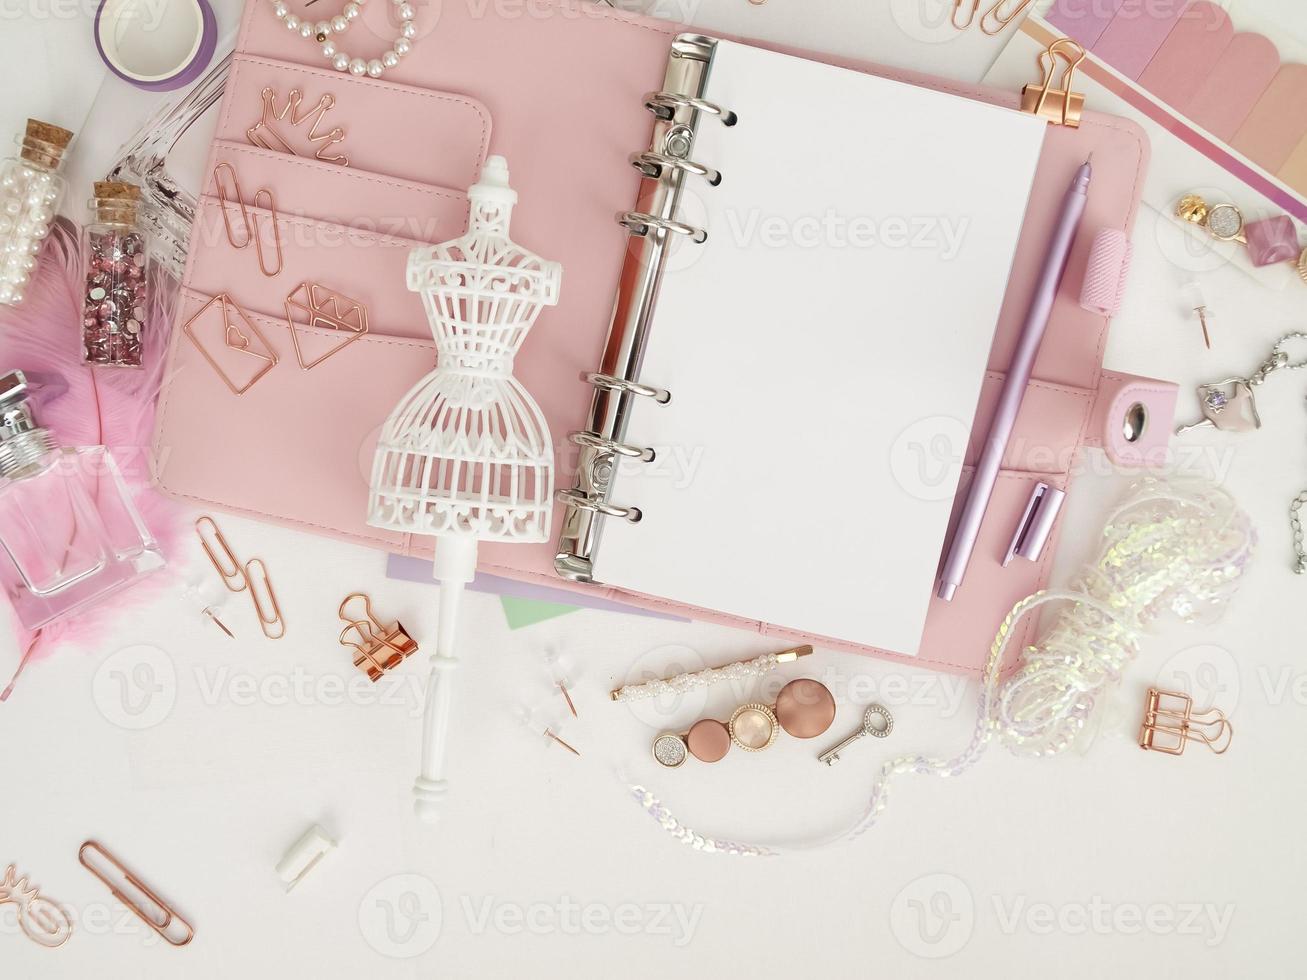 Top view of a pink planner with cute stationery. Pink glamour planner with a white mannequin figurine. Planner with open pages on a white background and with beautiful accessories pens, buttons, pins. photo